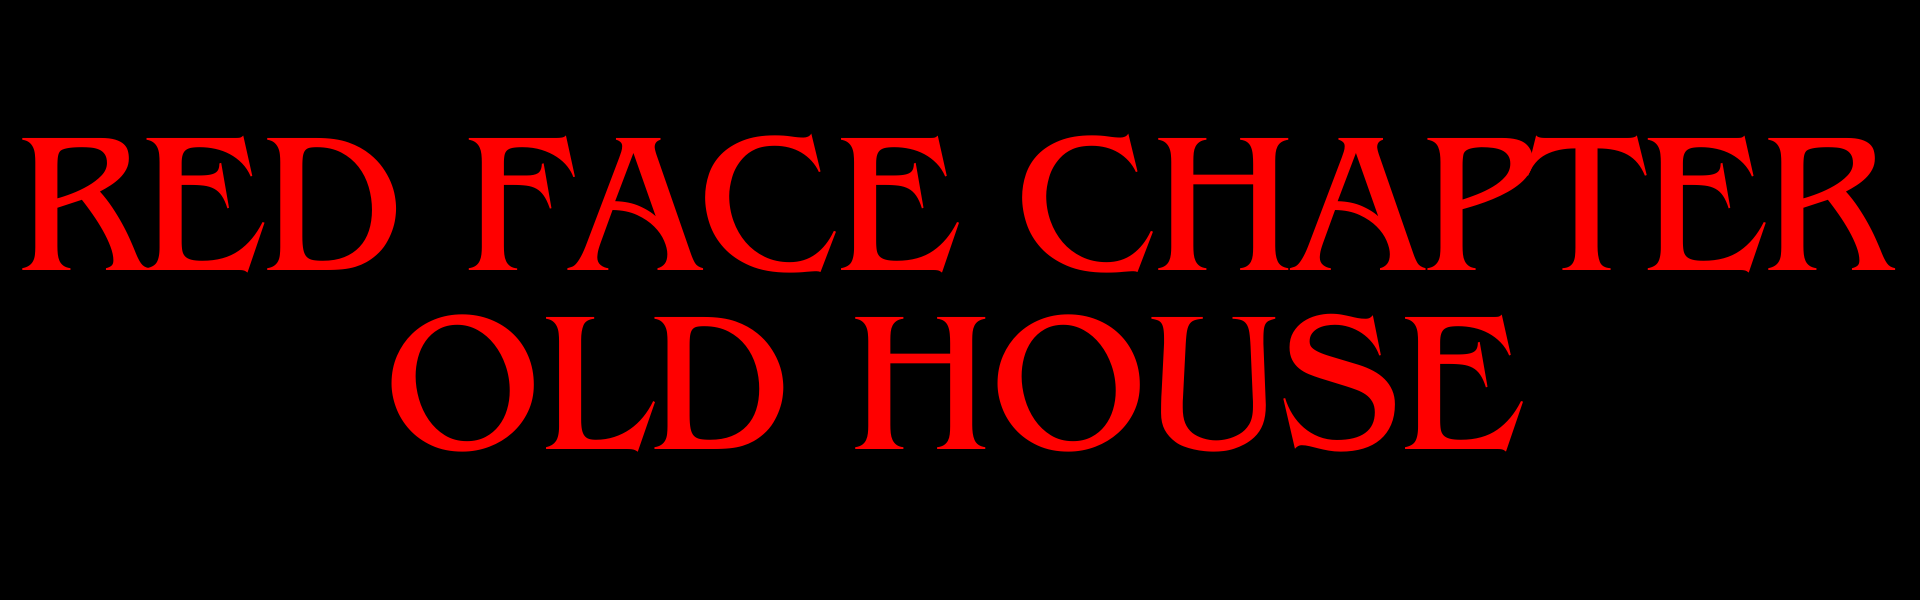 Red Face Chapter Old House